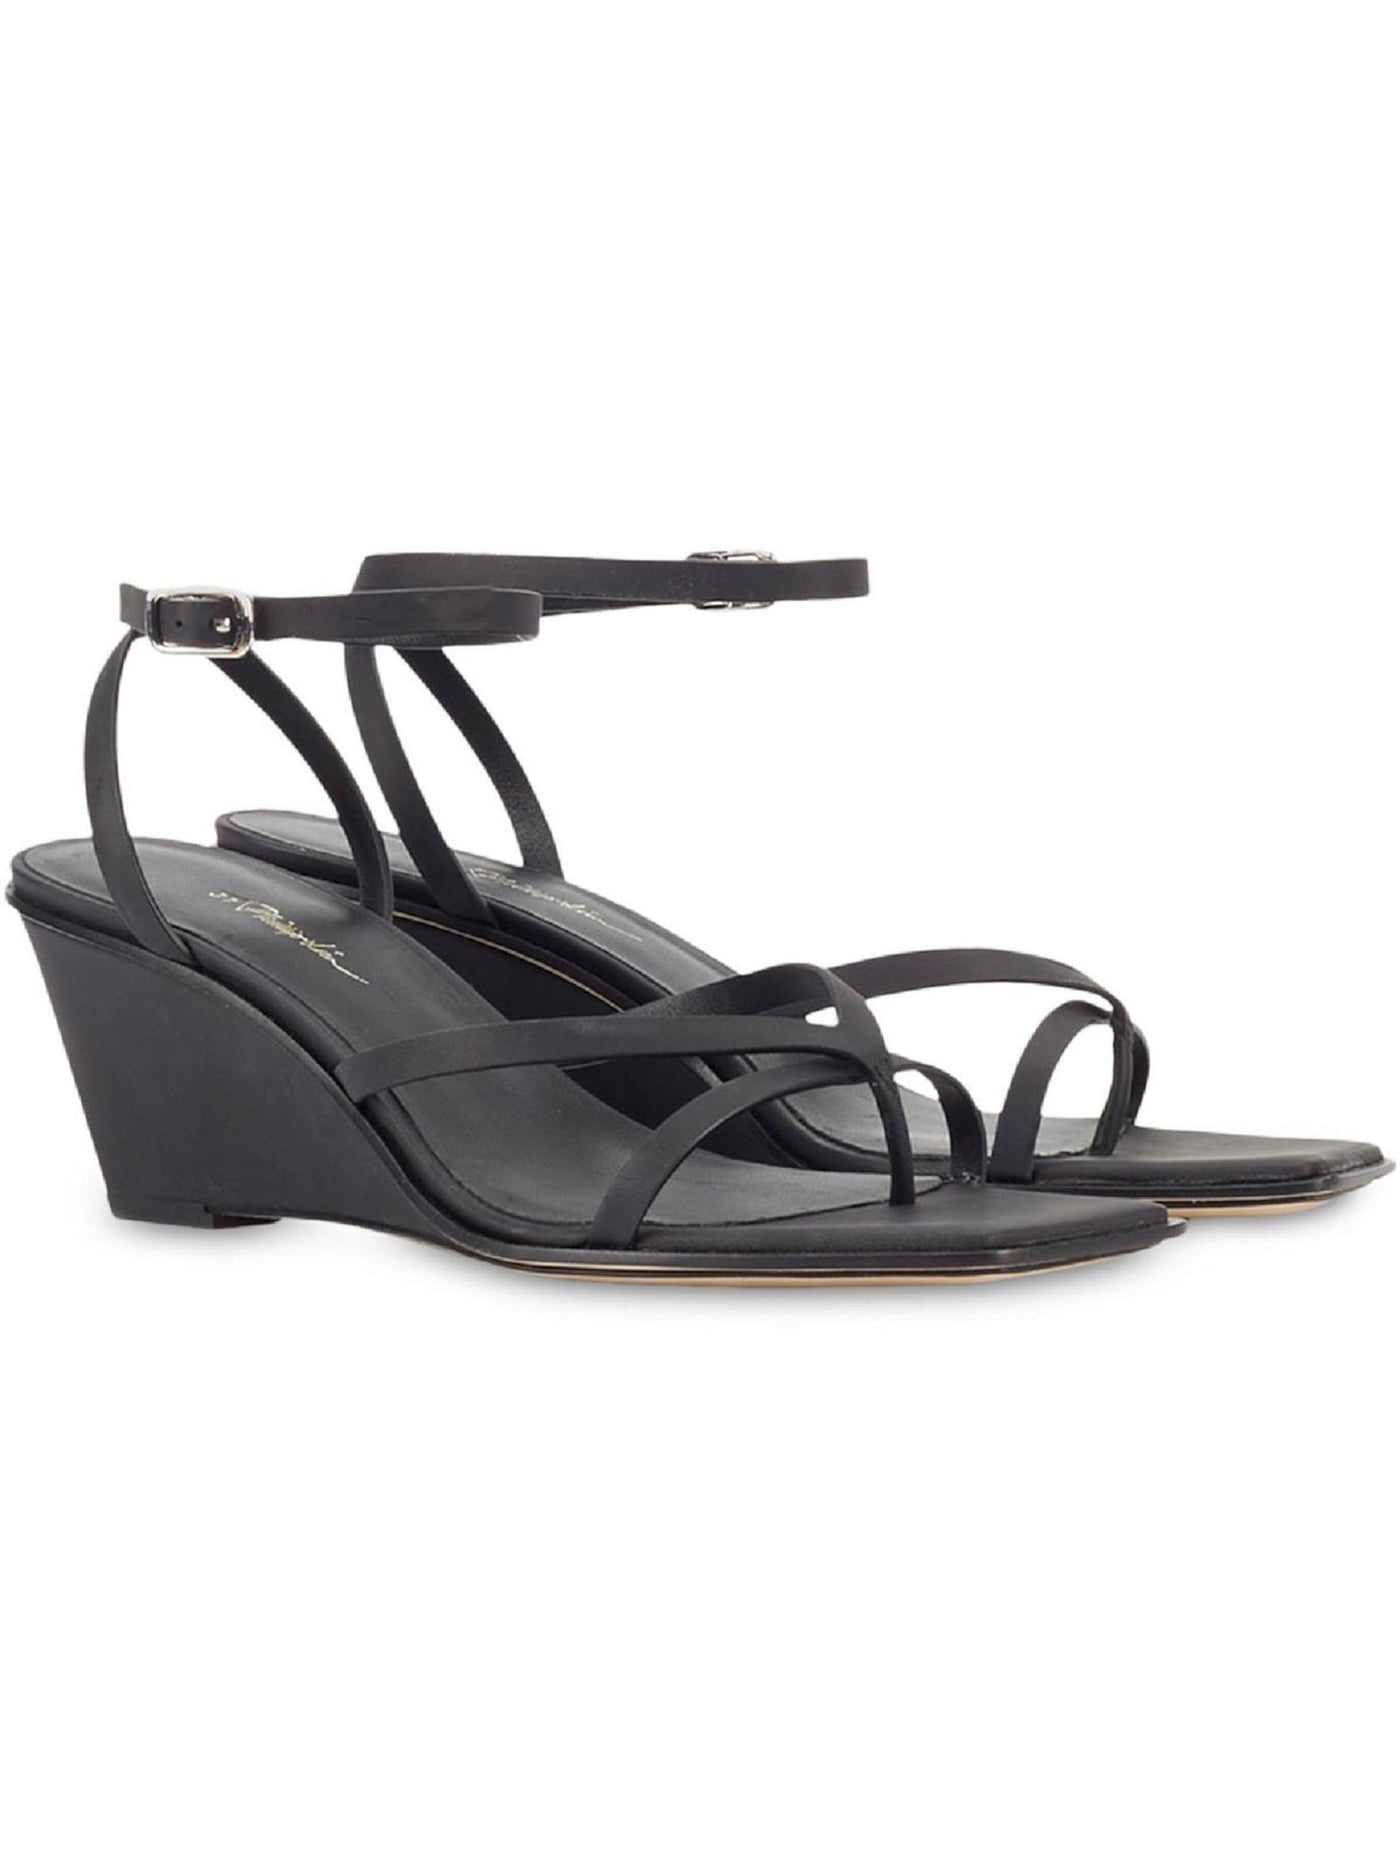 3.1 PHILLIP LIM Womens Black Goring Strappy Ankle Strap Adjustable Laura Square Toe Wedge Buckle Leather Dress Thong Sandals Shoes 38